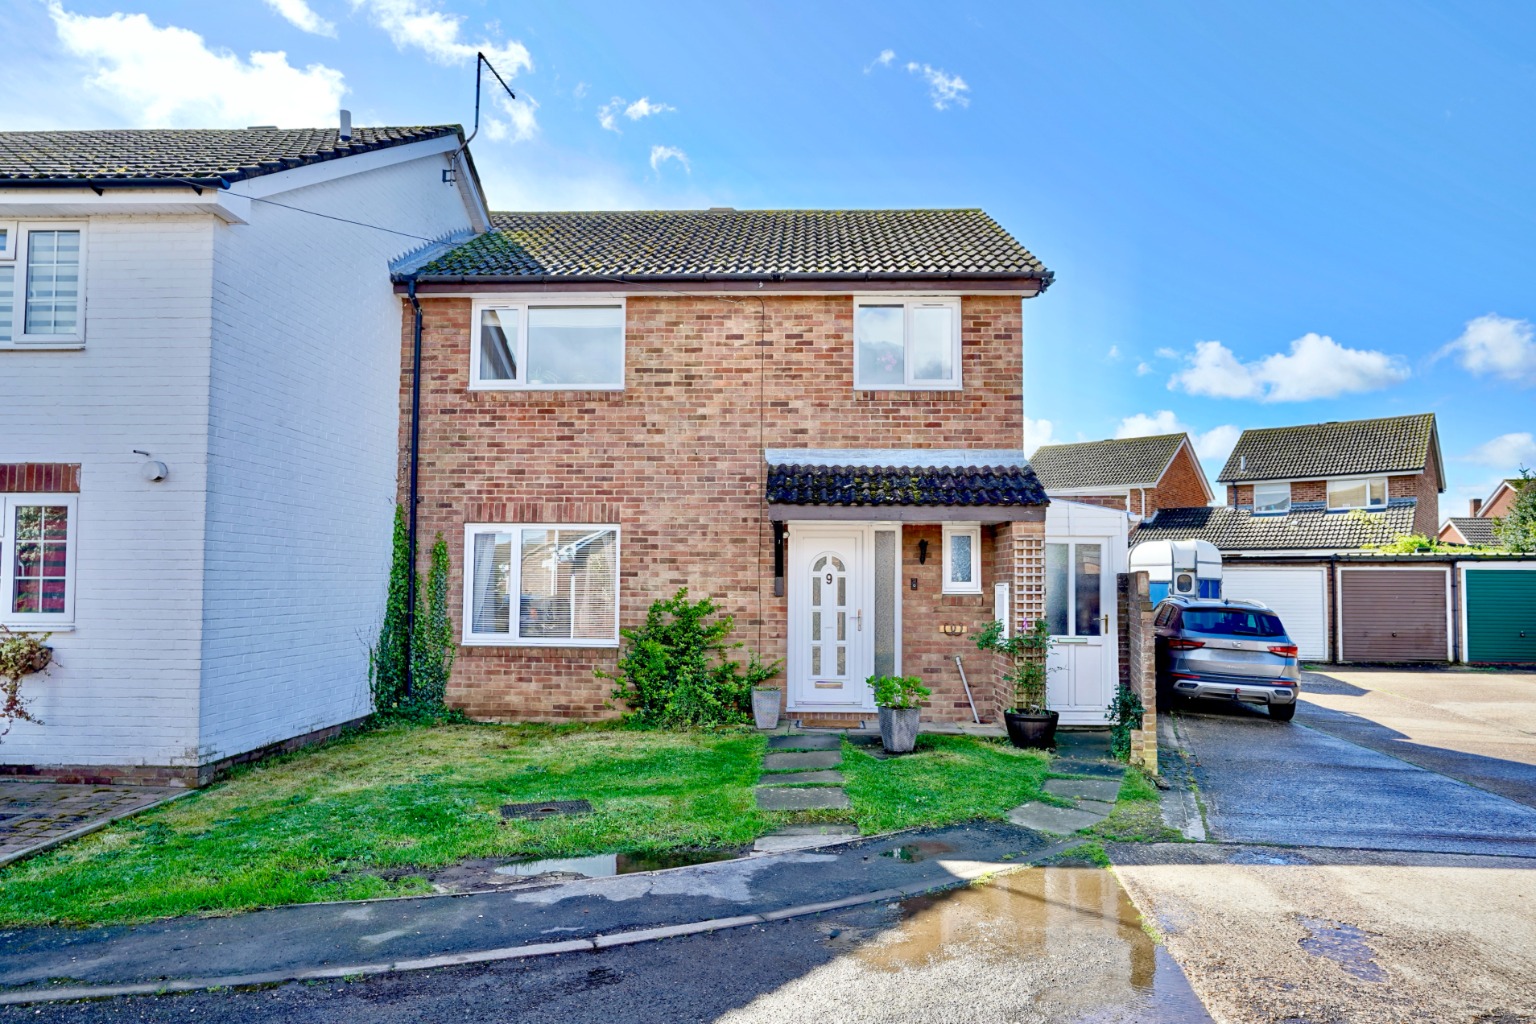 4 bed end of terrace house for sale in Pennway, Huntingdon  - Property Image 1